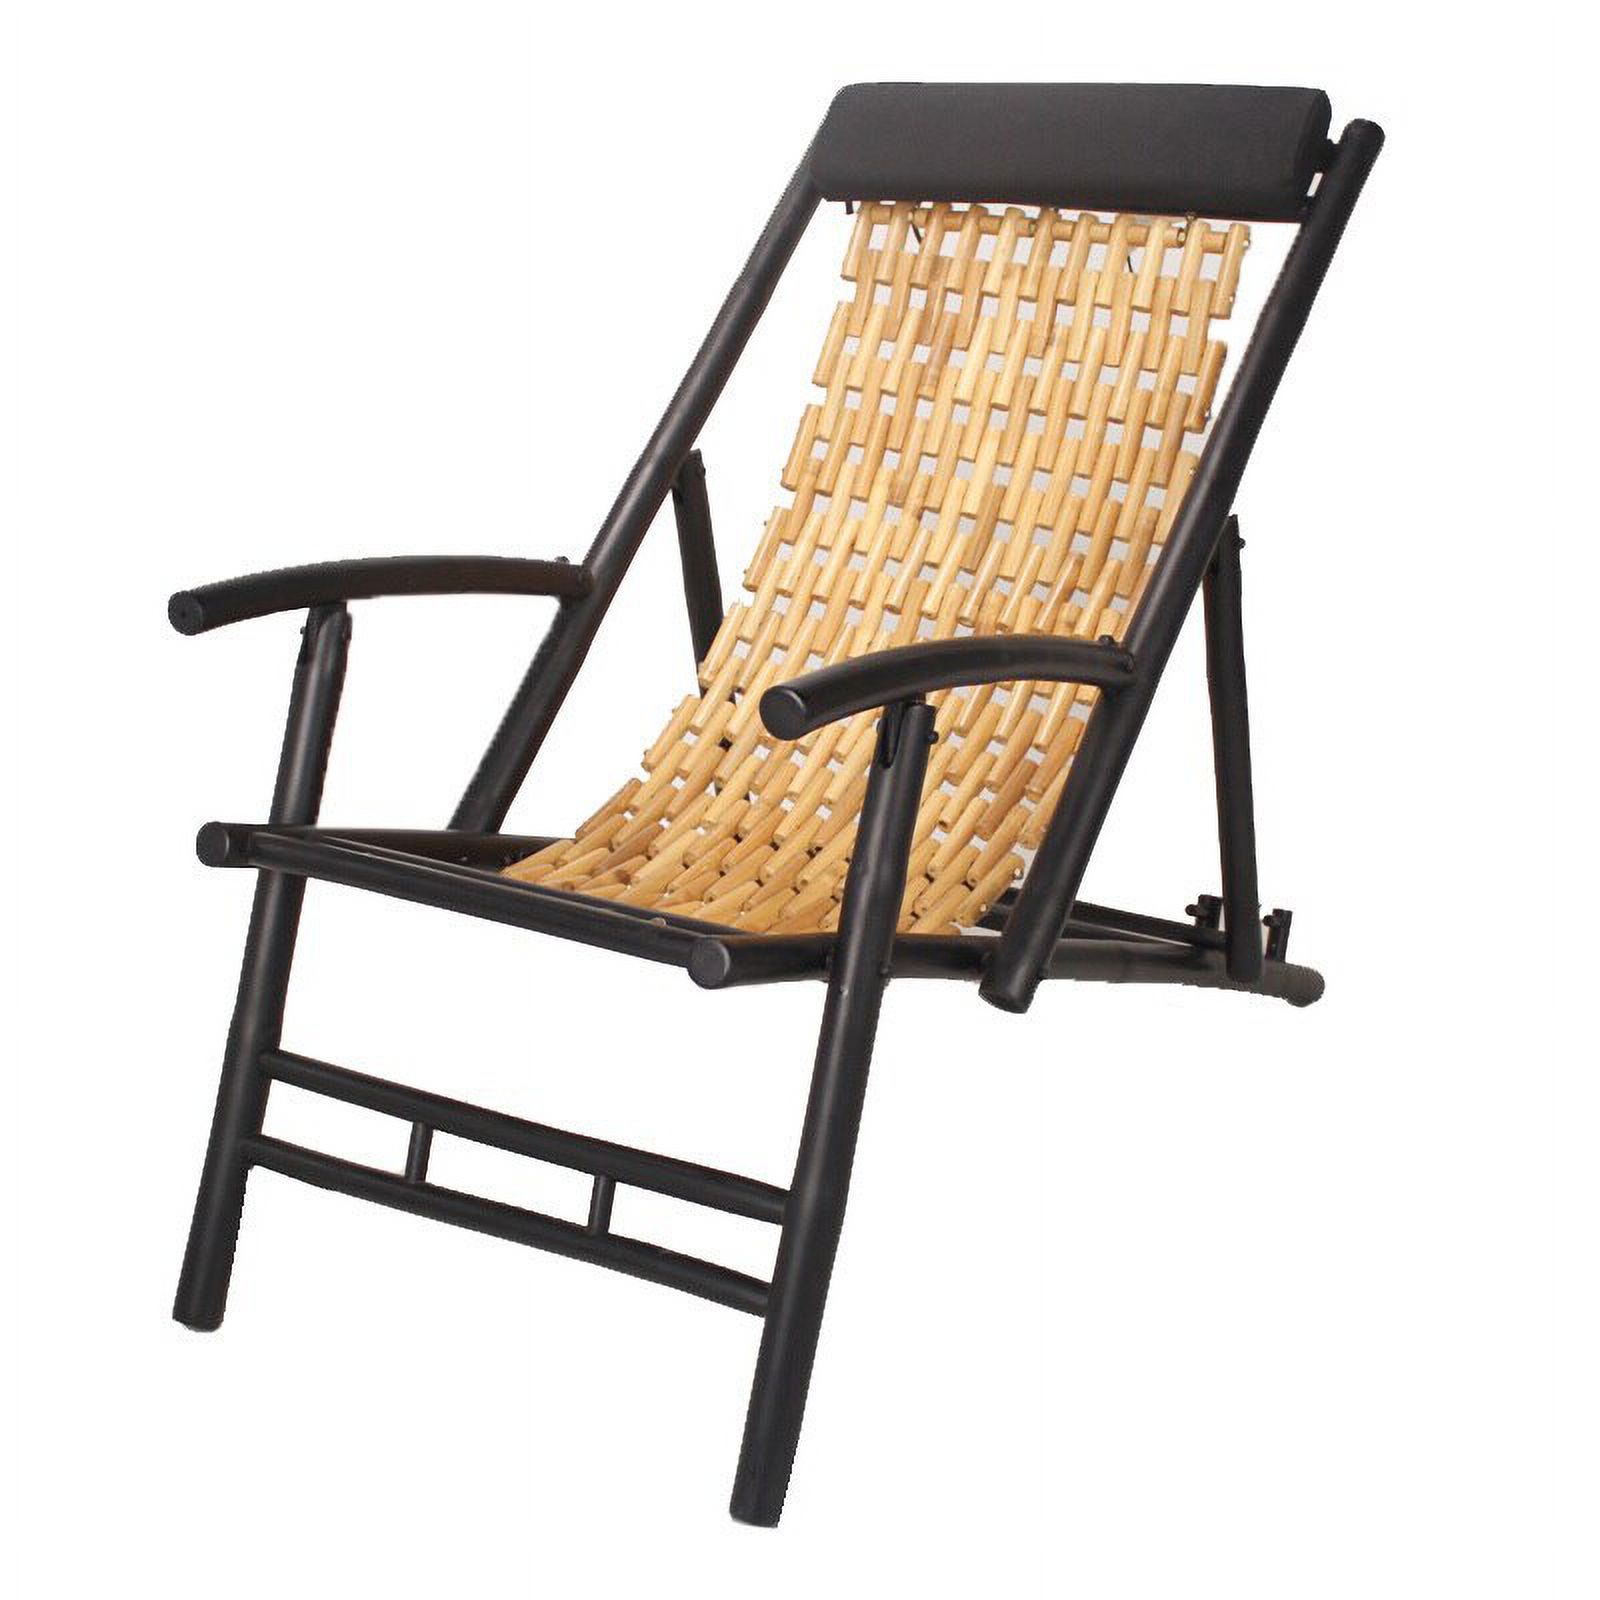 Heather Ann Creations W27048-BLKN Hilo Bamboo Folding Sling Chair - Black & Natural - image 2 of 2